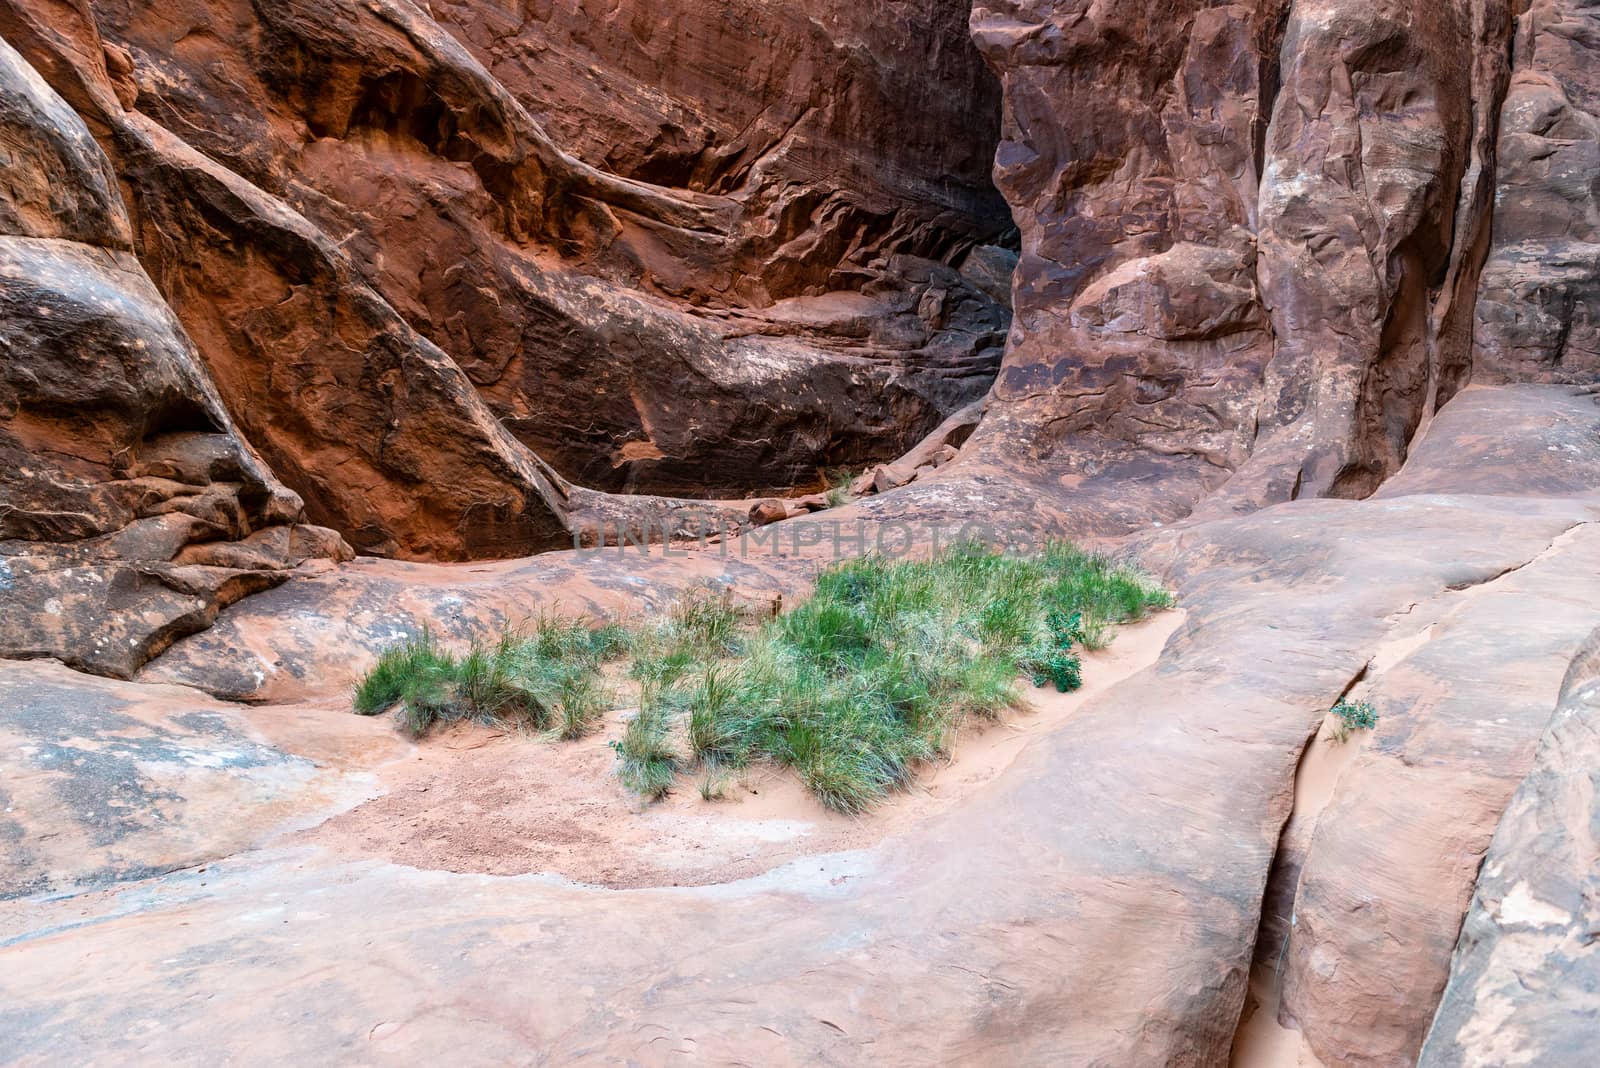 Grass growing in the desert setting of Fiery Furnace in Arches National Park, Utah